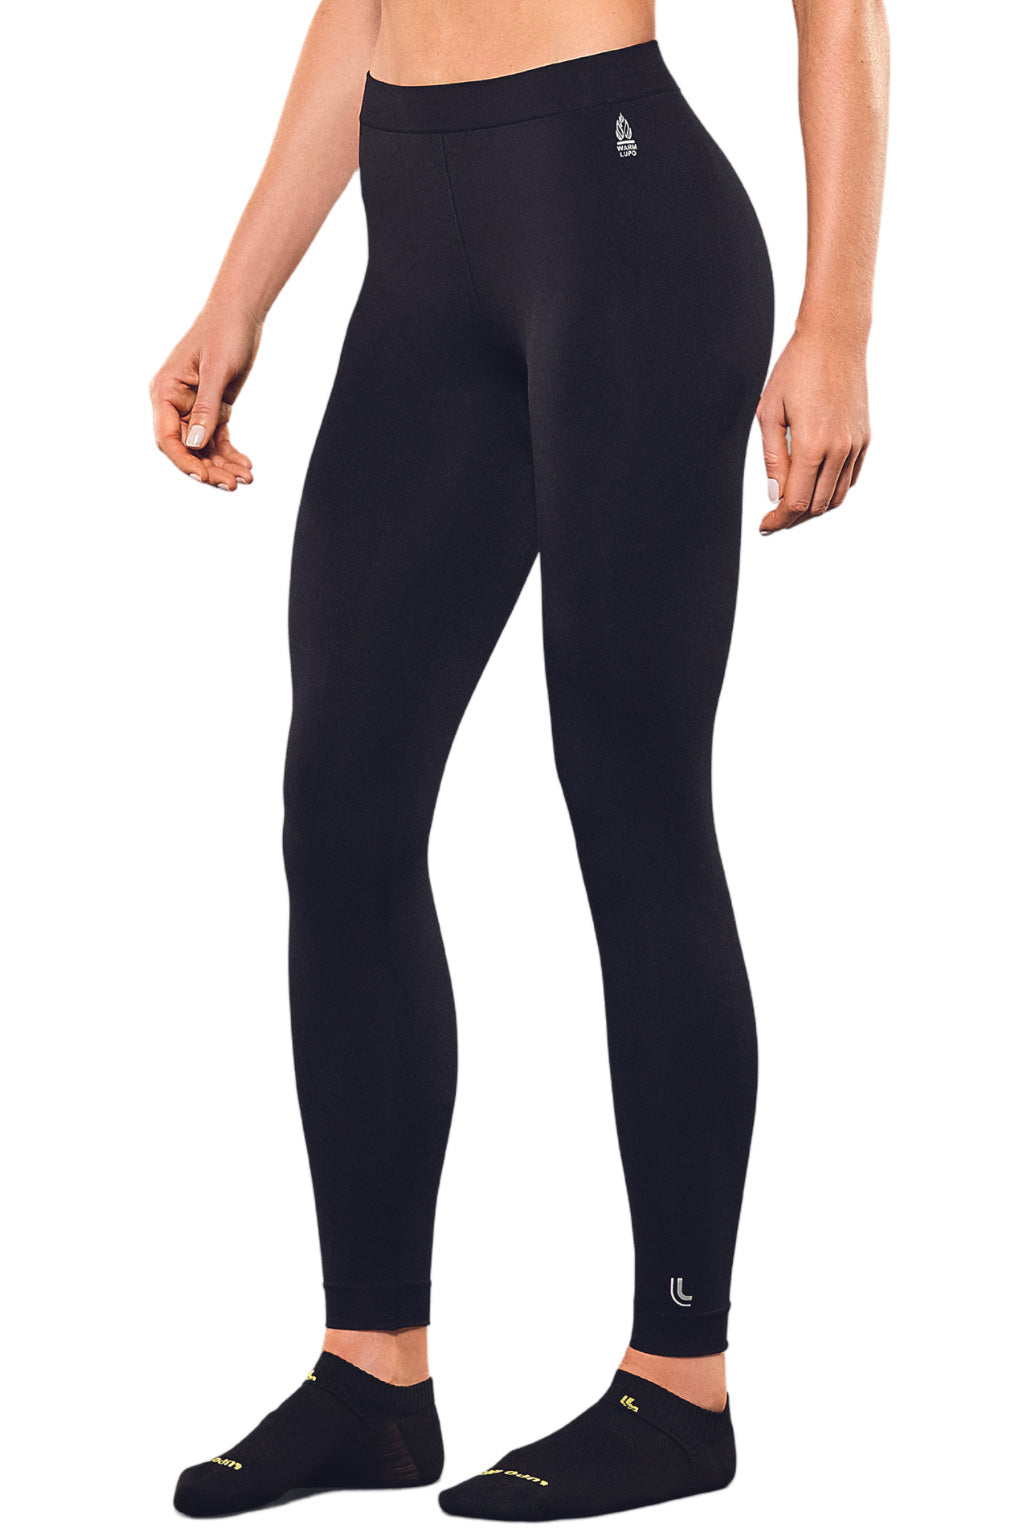 Calca Lupo AF Leg. Act Seamless Lupo Sport LUPO2, #Lupo unisex-adult Preto -  9990 P